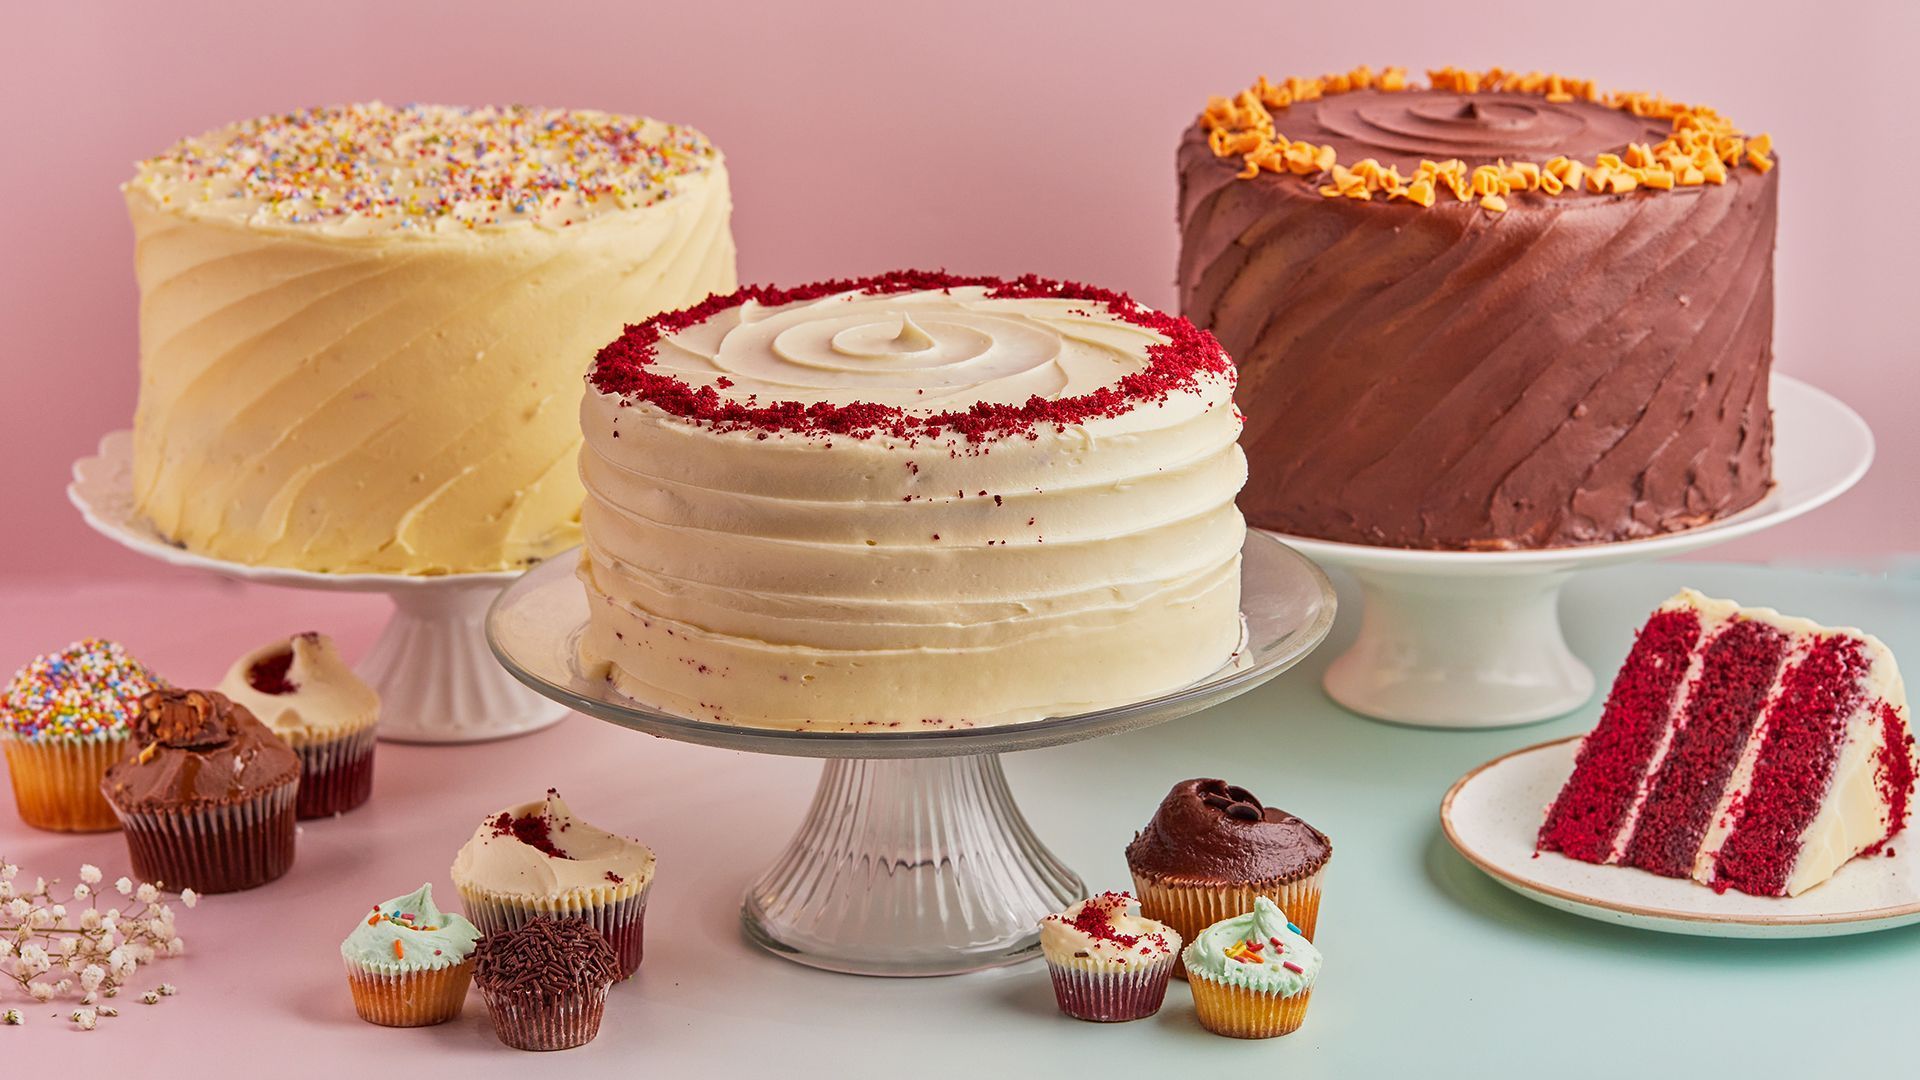 RECIPE: Red Velvet cake from the Hummingbird Bakery - The Graphic Foodie |  Brighton Food Blog & Restaurant Reviews